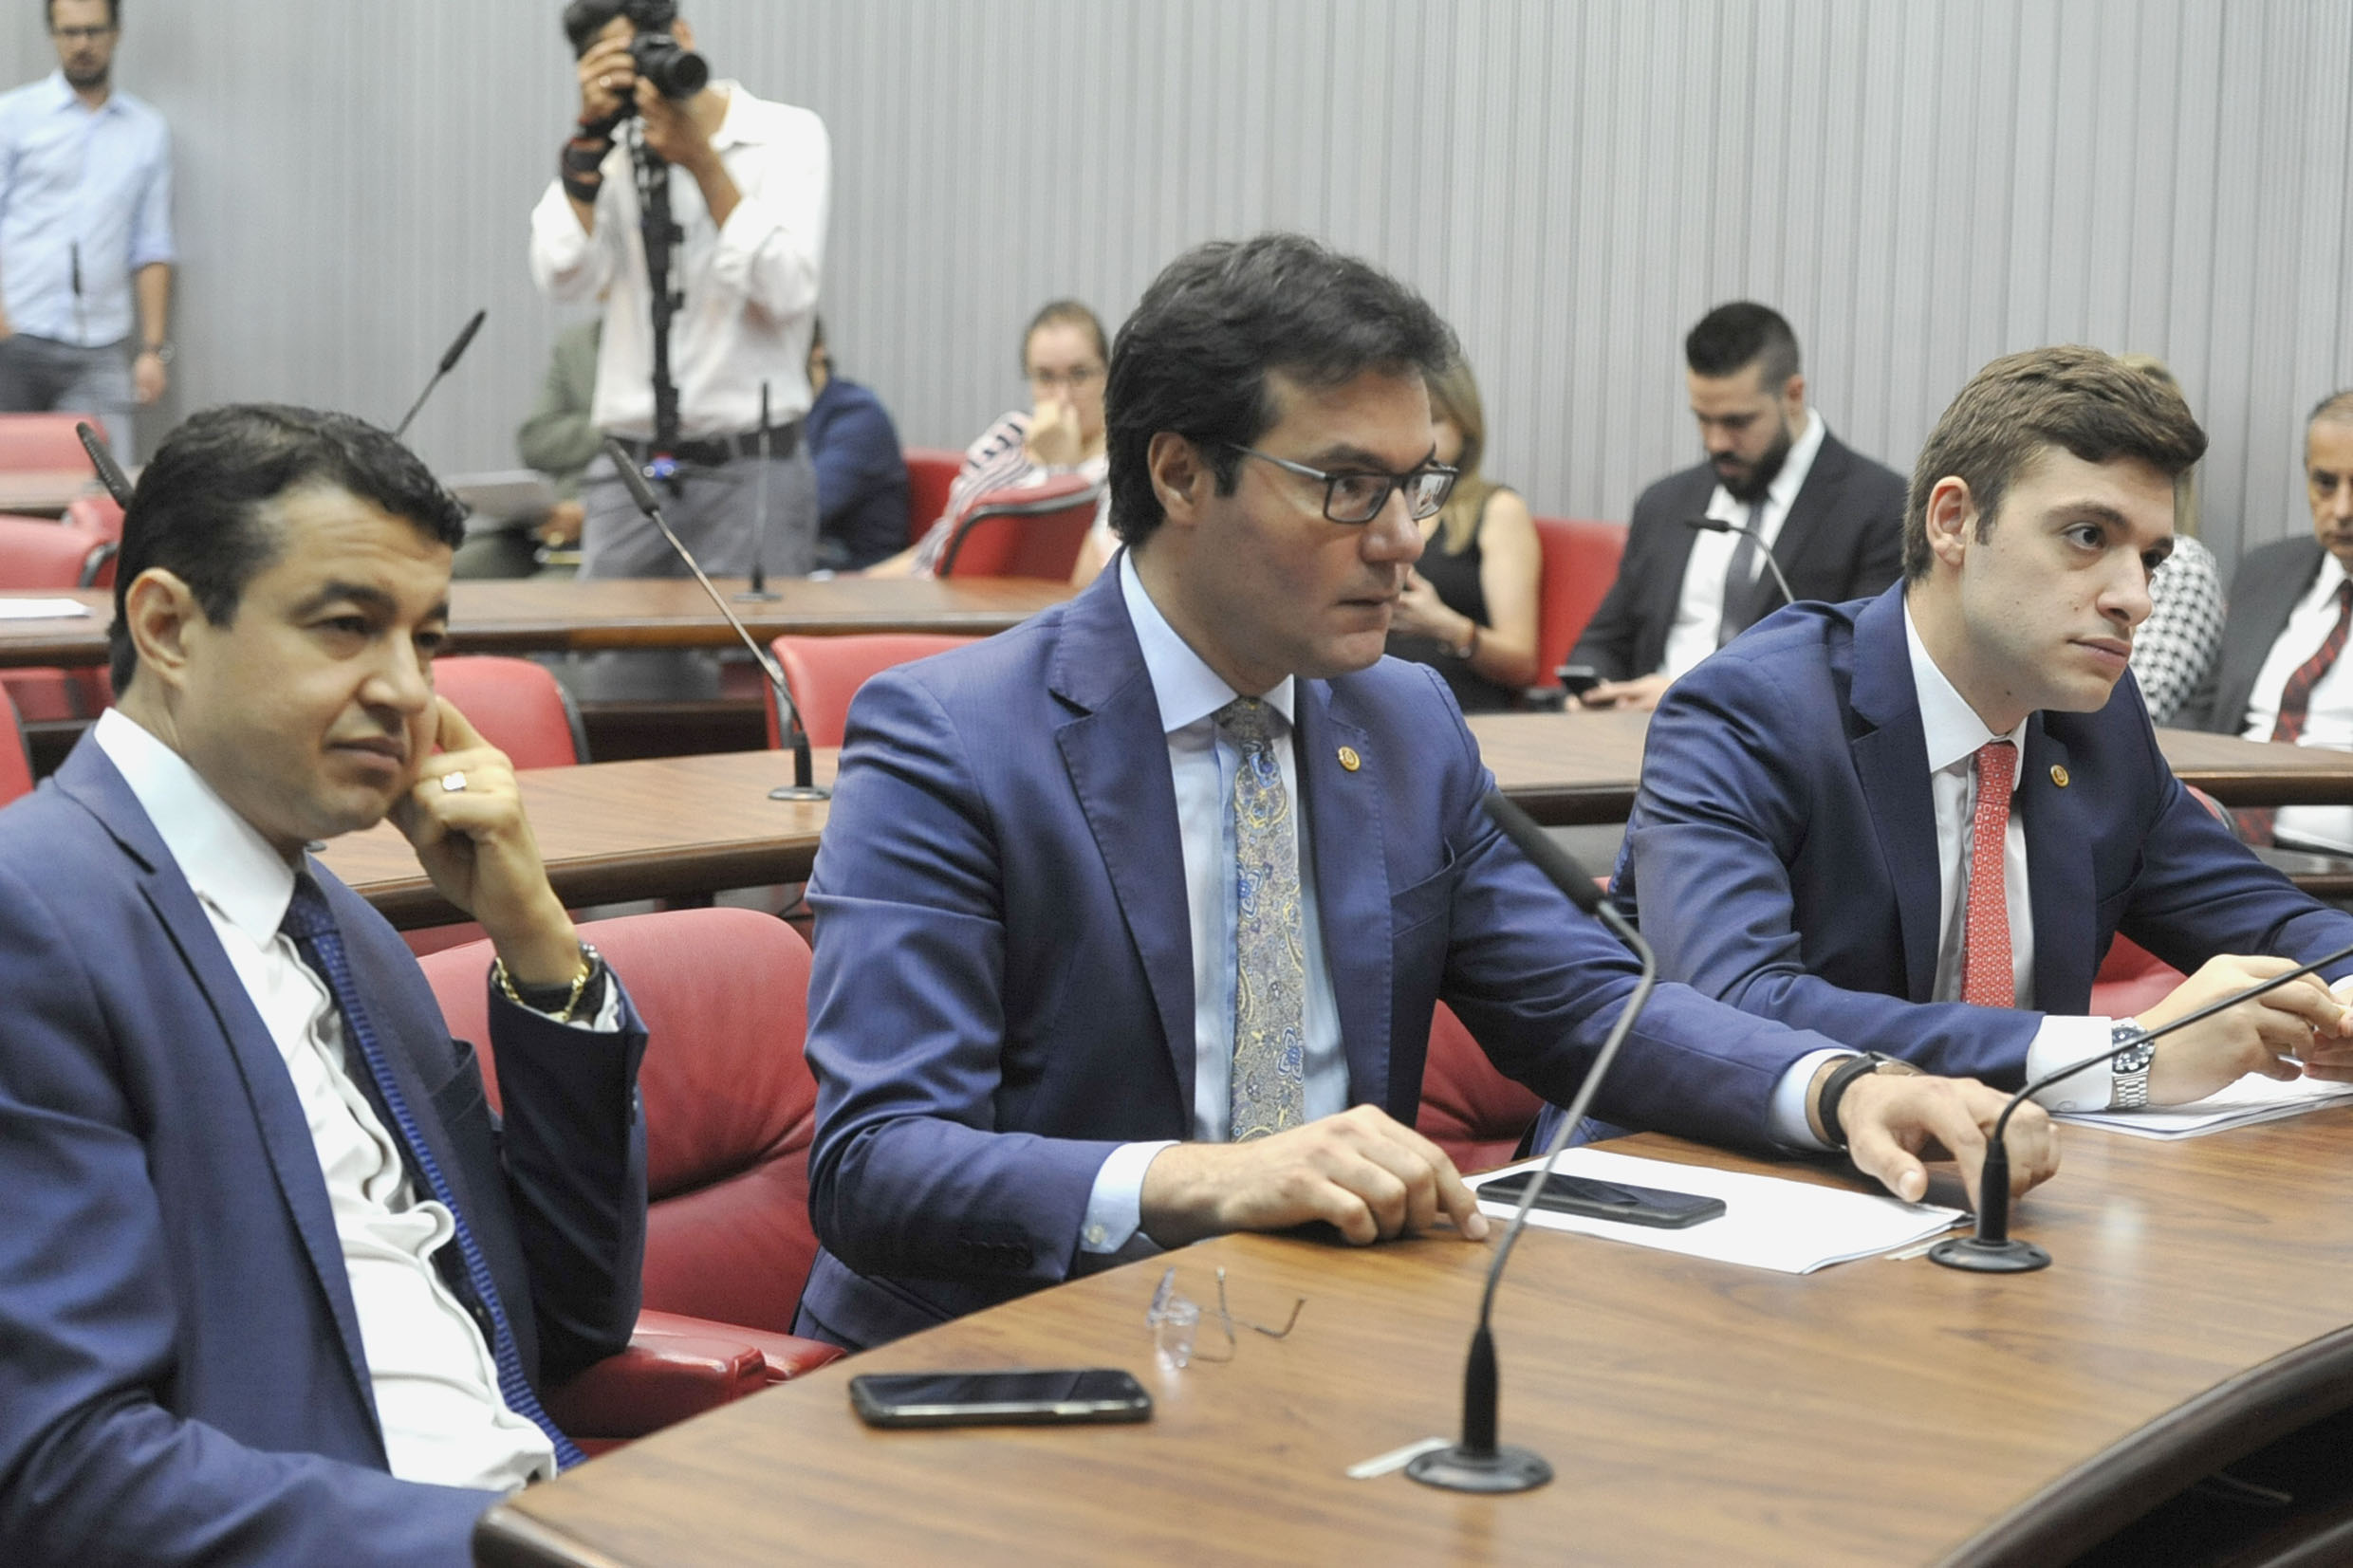 Parlamentares na comissão<a style='float:right' href='https://www3.al.sp.gov.br/repositorio/noticia/N-04-2019/fg233423.jpg' target=_blank><img src='/_img/material-file-download-white.png' width='14px' alt='Clique para baixar a imagem'></a>